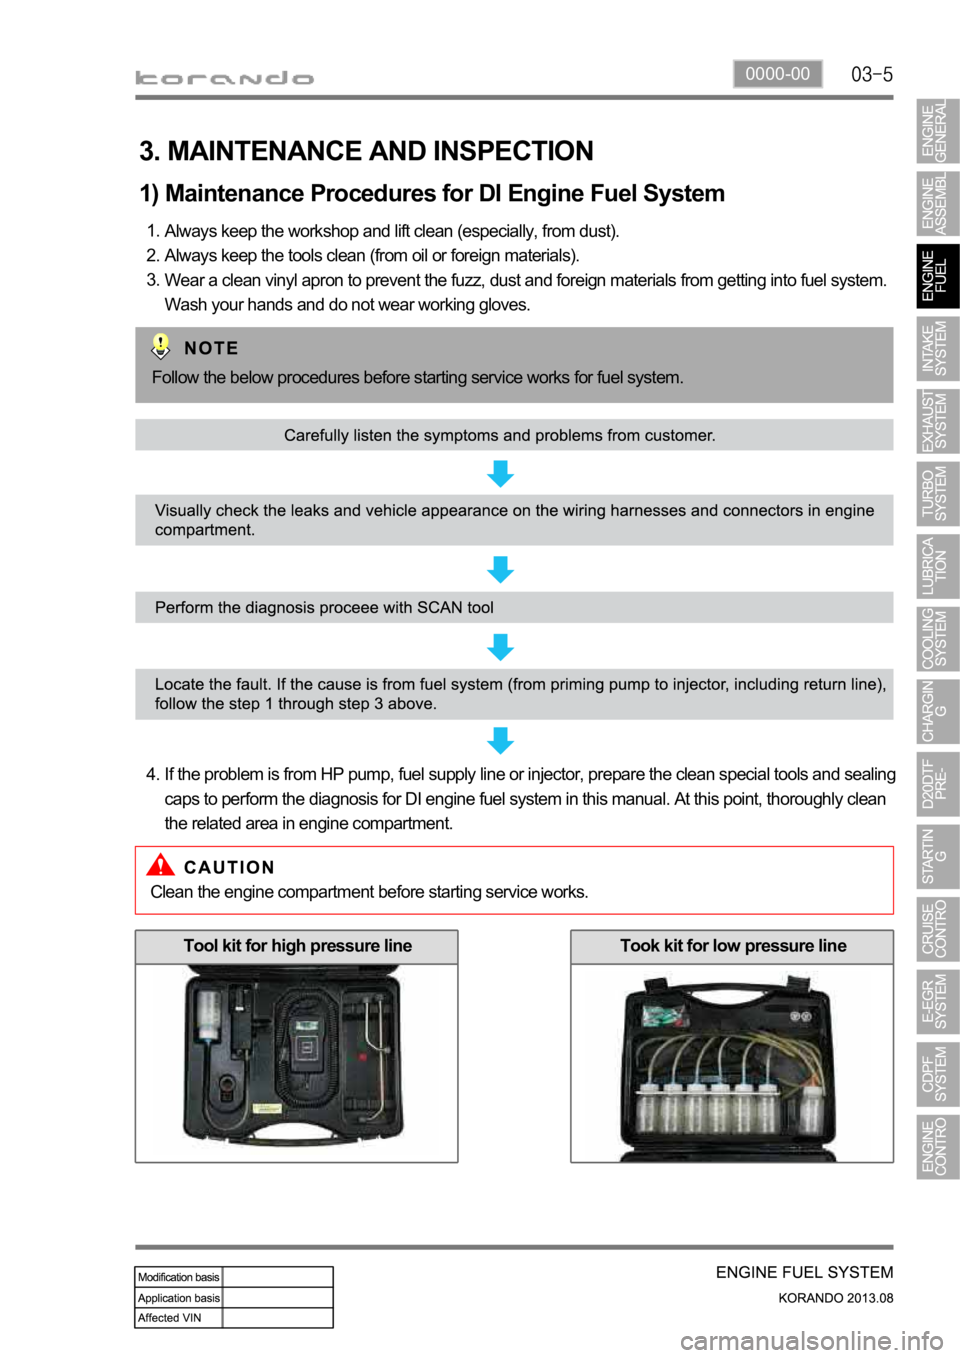 SSANGYONG KORANDO 2013 User Guide 0000-00
3. MAINTENANCE AND INSPECTION
1) Maintenance Procedures for DI Engine Fuel System
Always keep the workshop and lift clean (especially, from dust).
Always keep the tools clean (from oil or fore